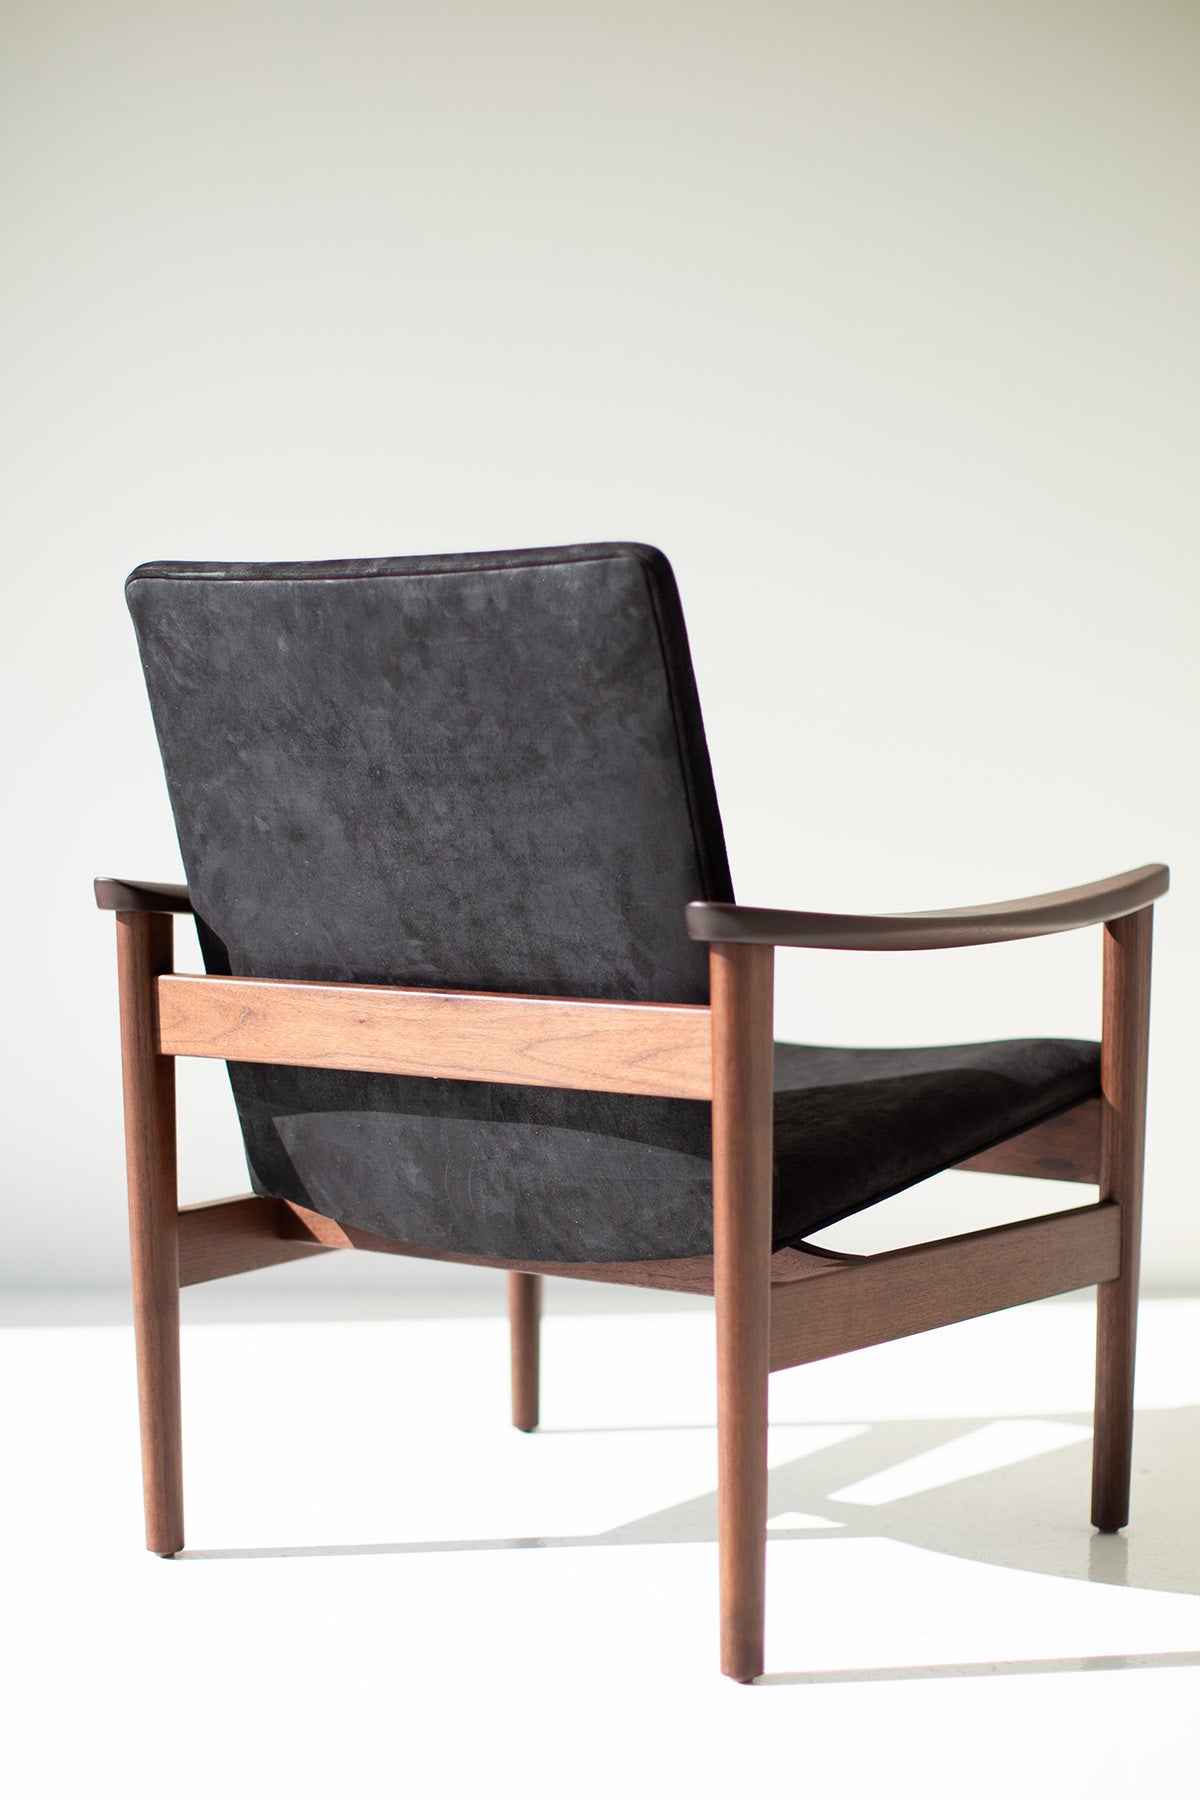 Lawrence-Peabody-Walnut-Occasional-Chair-05